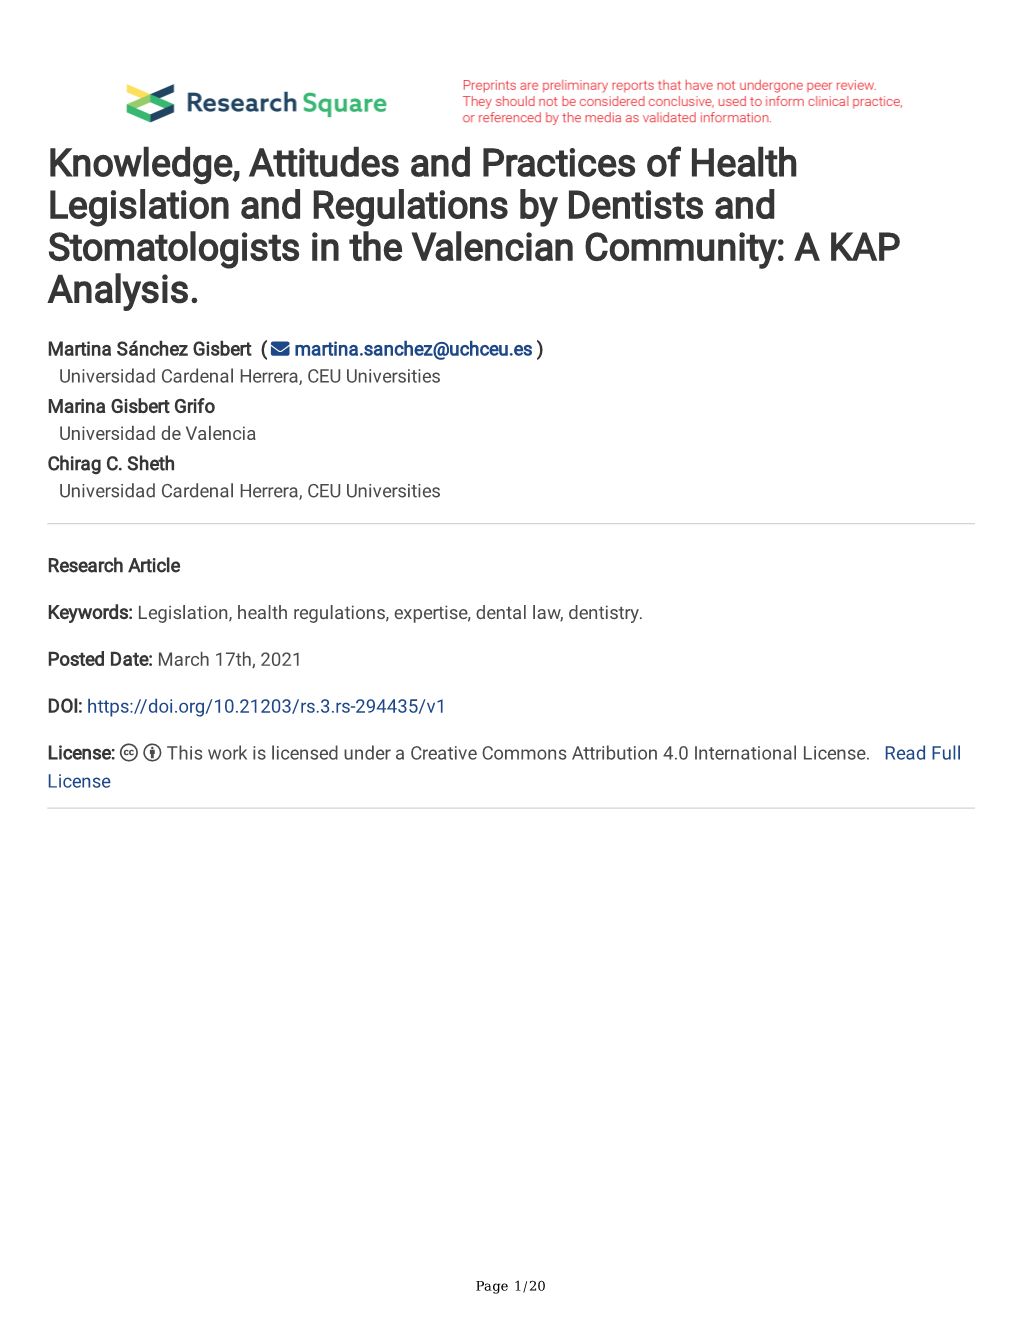 Knowledge, Attitudes and Practices of Health Legislation and Regulations by Dentists and Stomatologists in the Valencian Community: a KAP Analysis